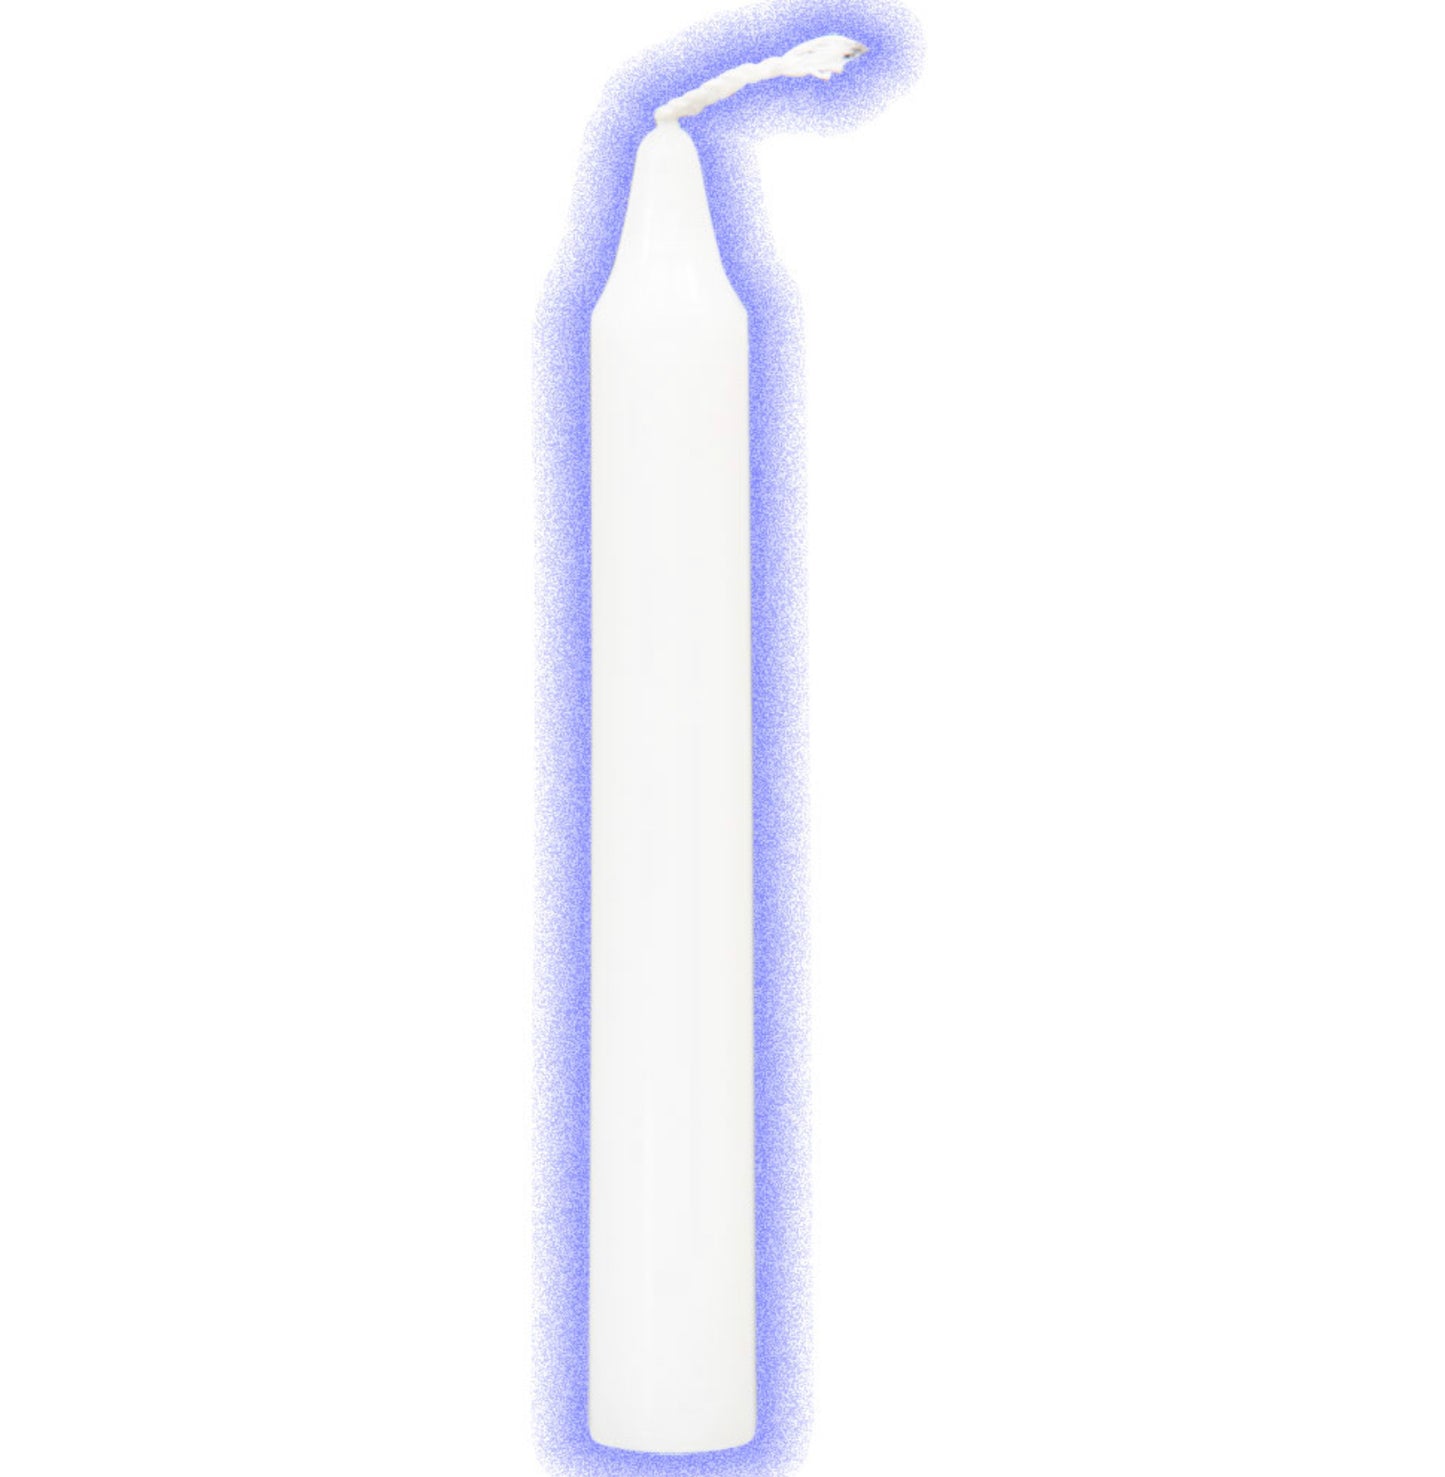 CHIME Set of 20 piece WHITE 4” ritual candles